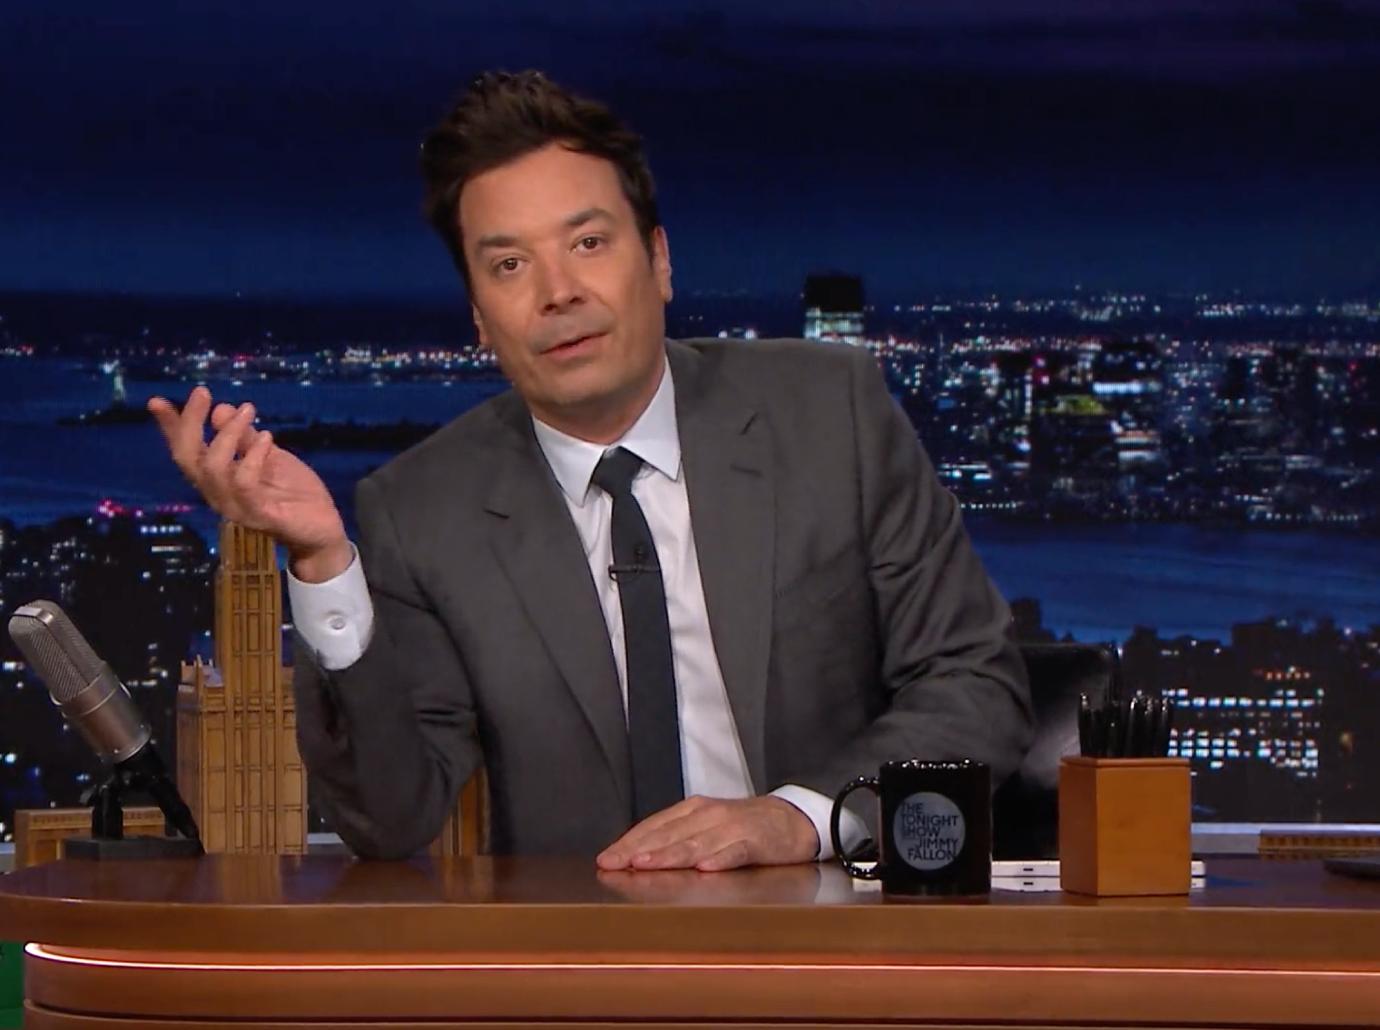 Jimmy Fallon Grateful For Tonight Show Return After Toxic Claims